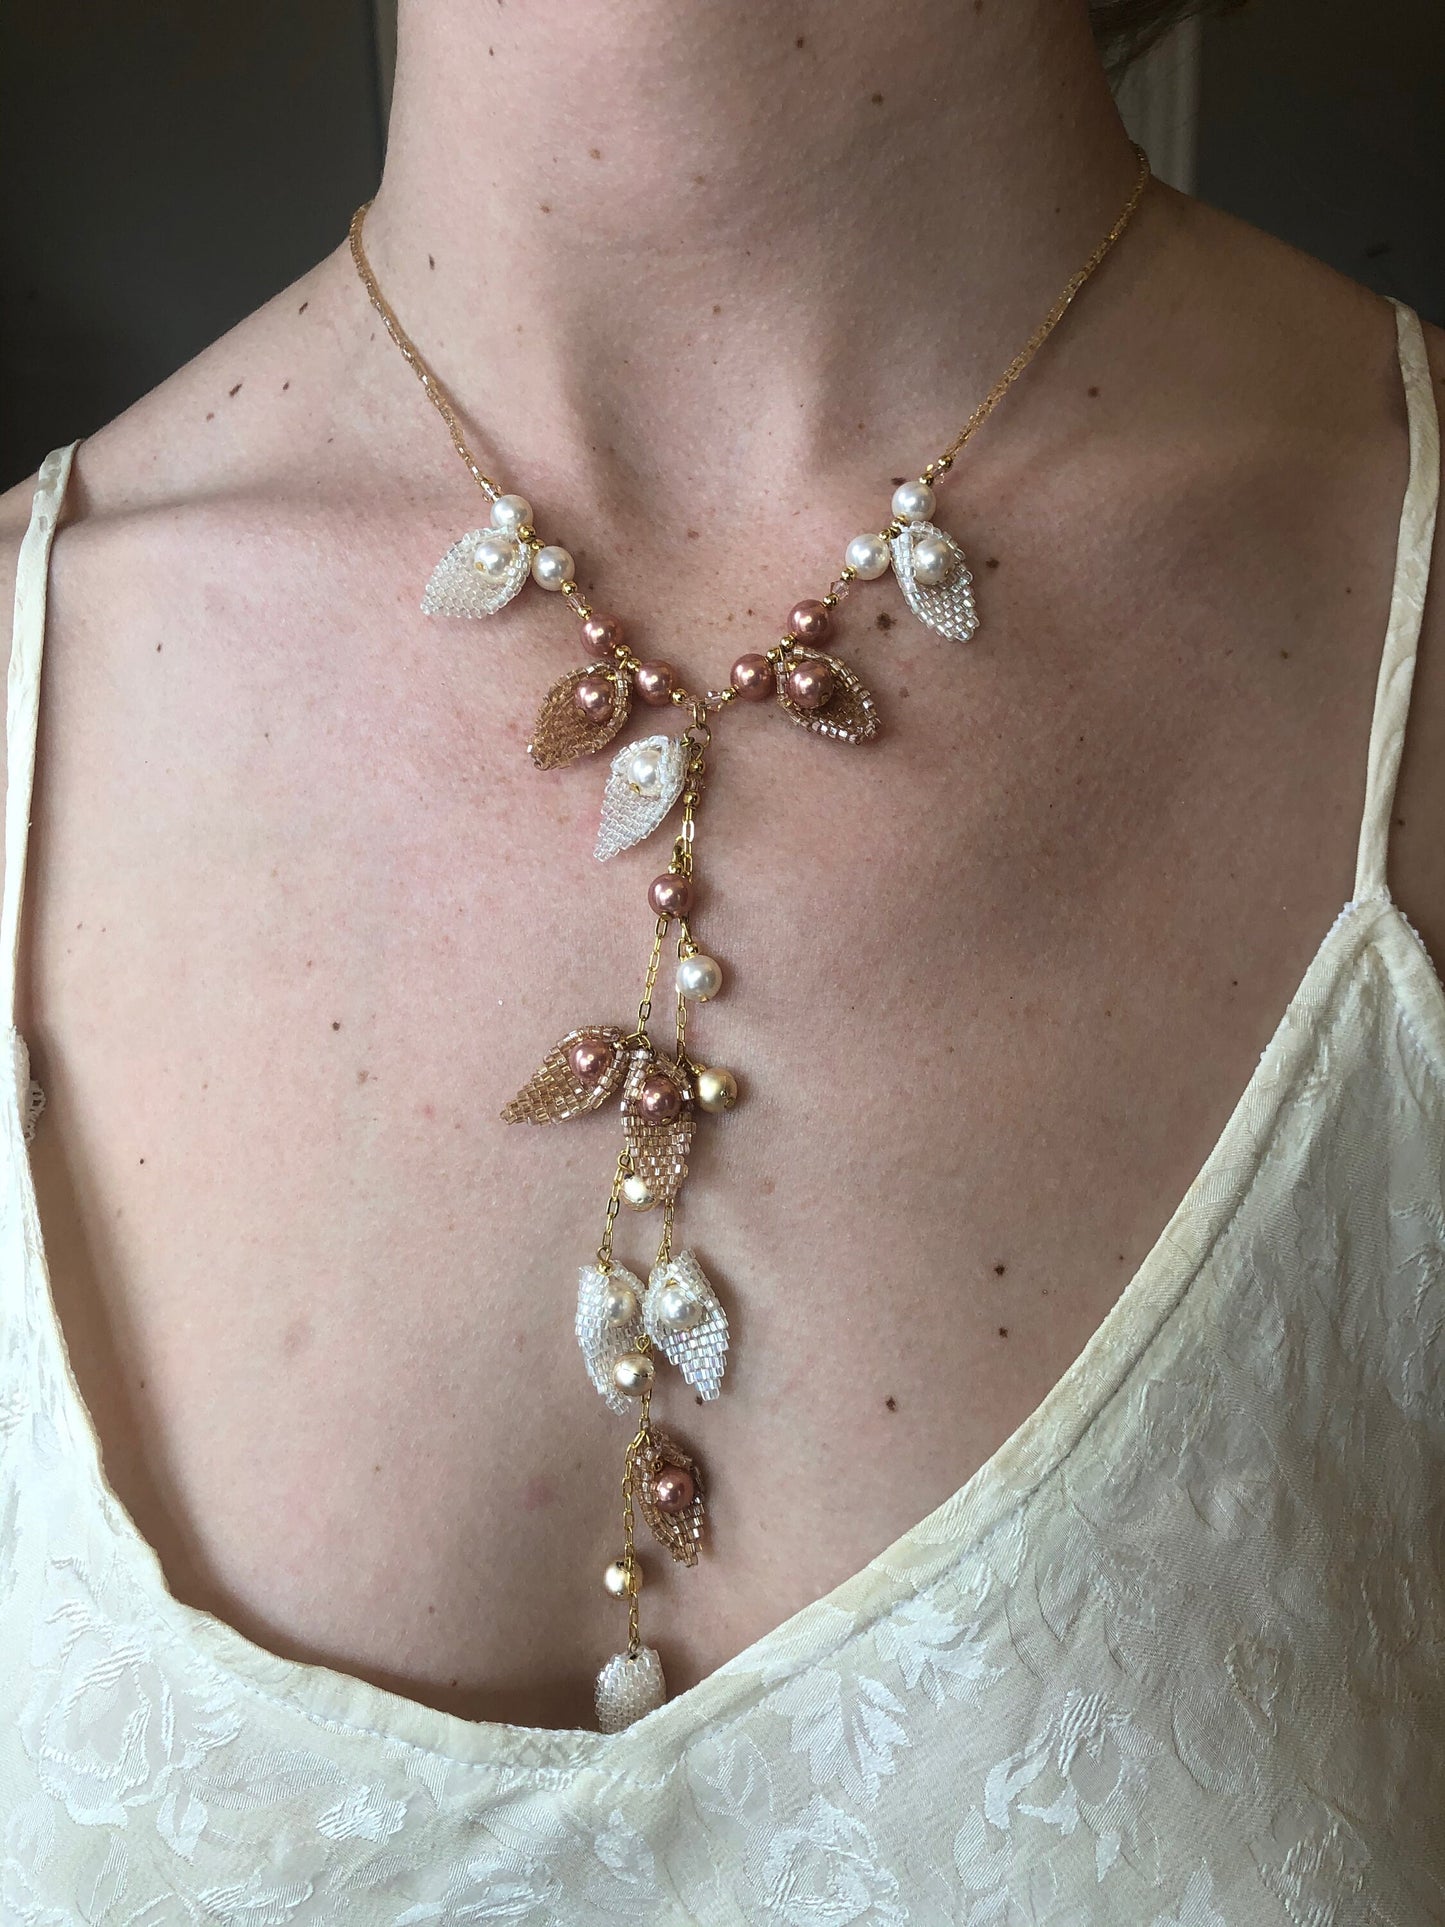 Necklace, handmade, handwoven leaves with set-in pearls makes for a flowing garden necklace.